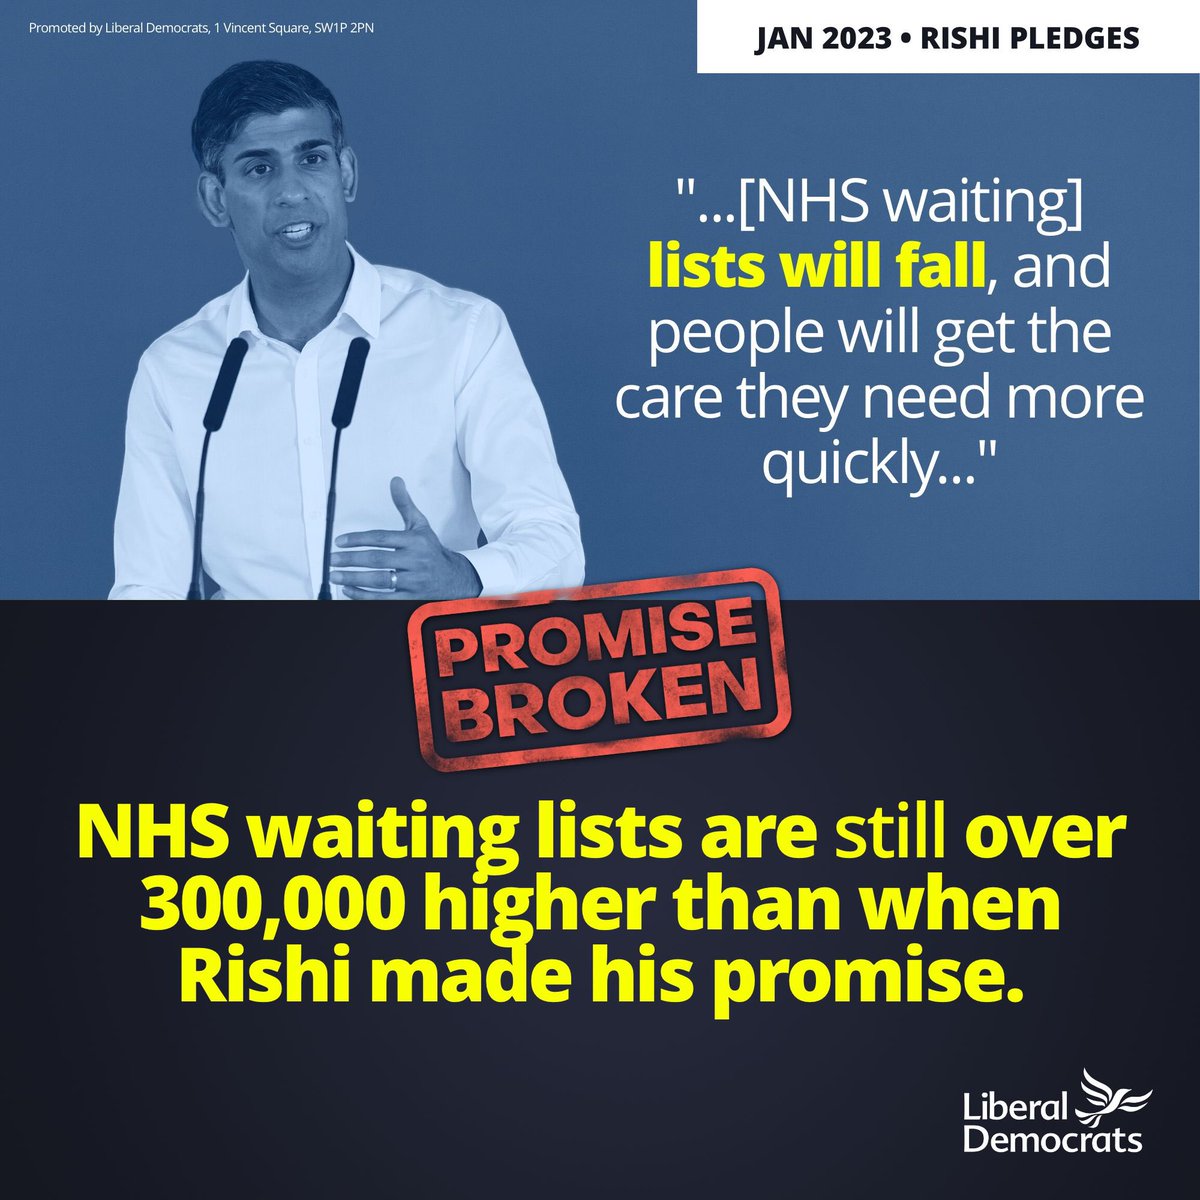 We have been let down by the @MedwayTories, who presided over massive waiting lists in the NHS. You can’t trust their or Sunak’s empty promises.